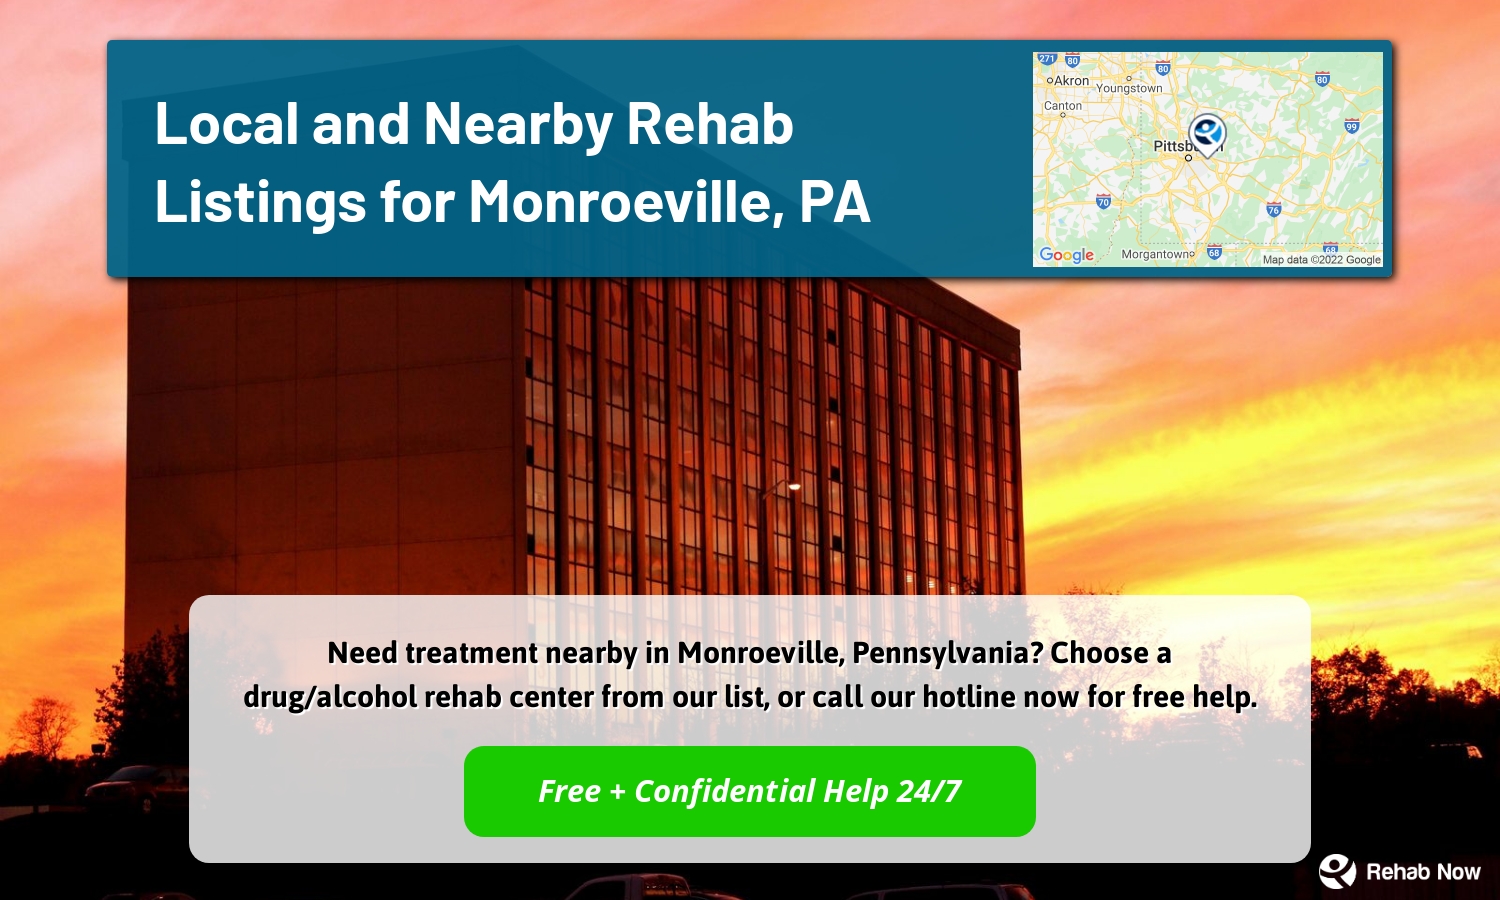 Need treatment nearby in Monroeville, Pennsylvania? Choose a drug/alcohol rehab center from our list, or call our hotline now for free help.